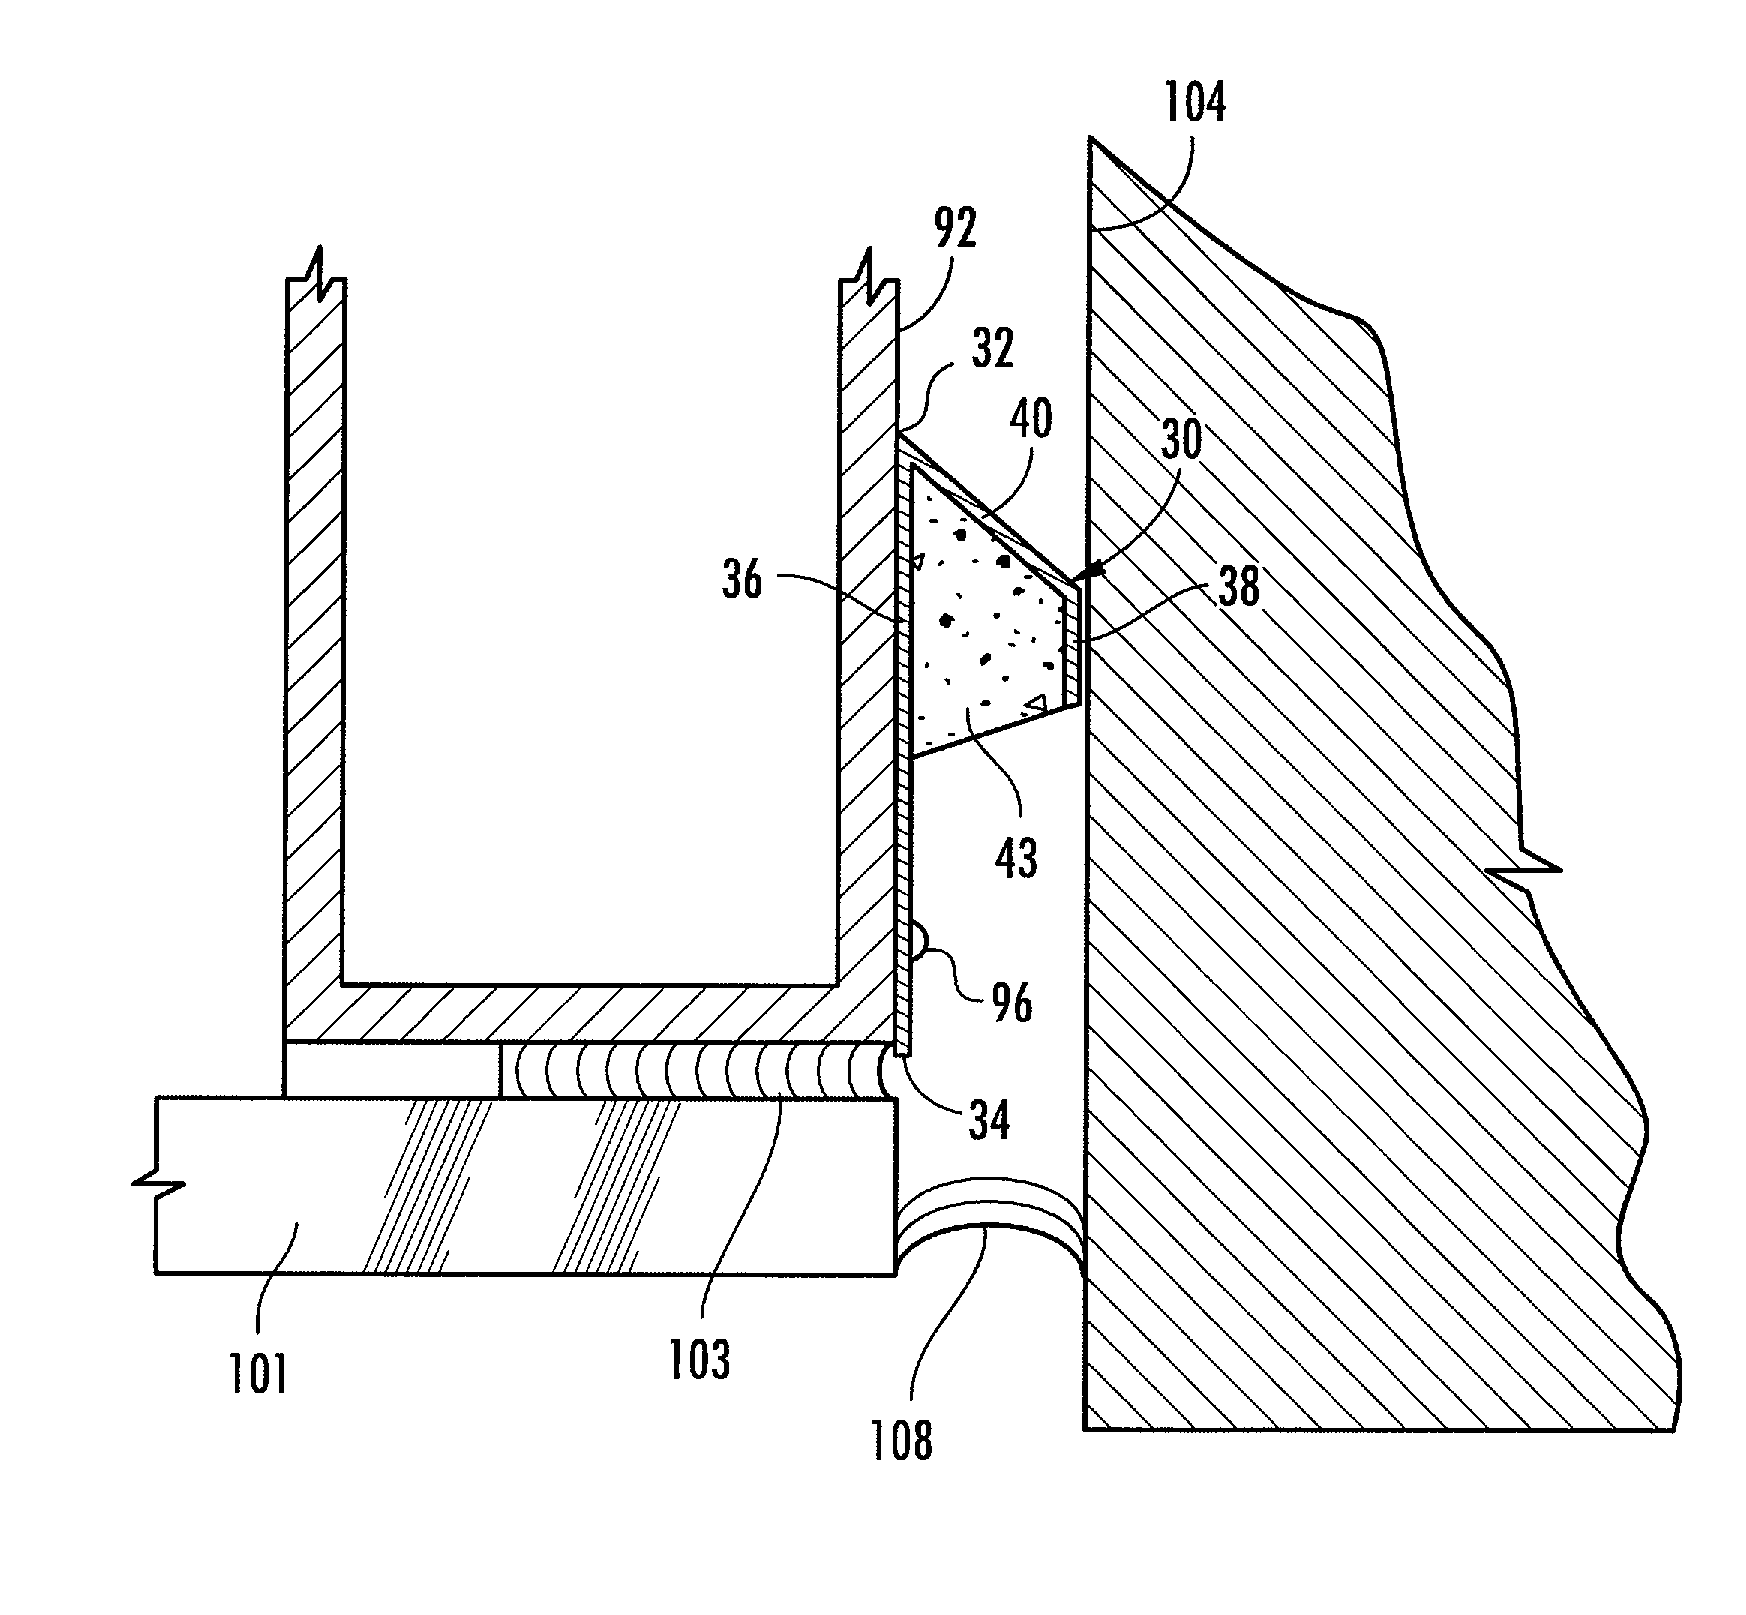 Window structure with expansion member for inhibiting flood waters